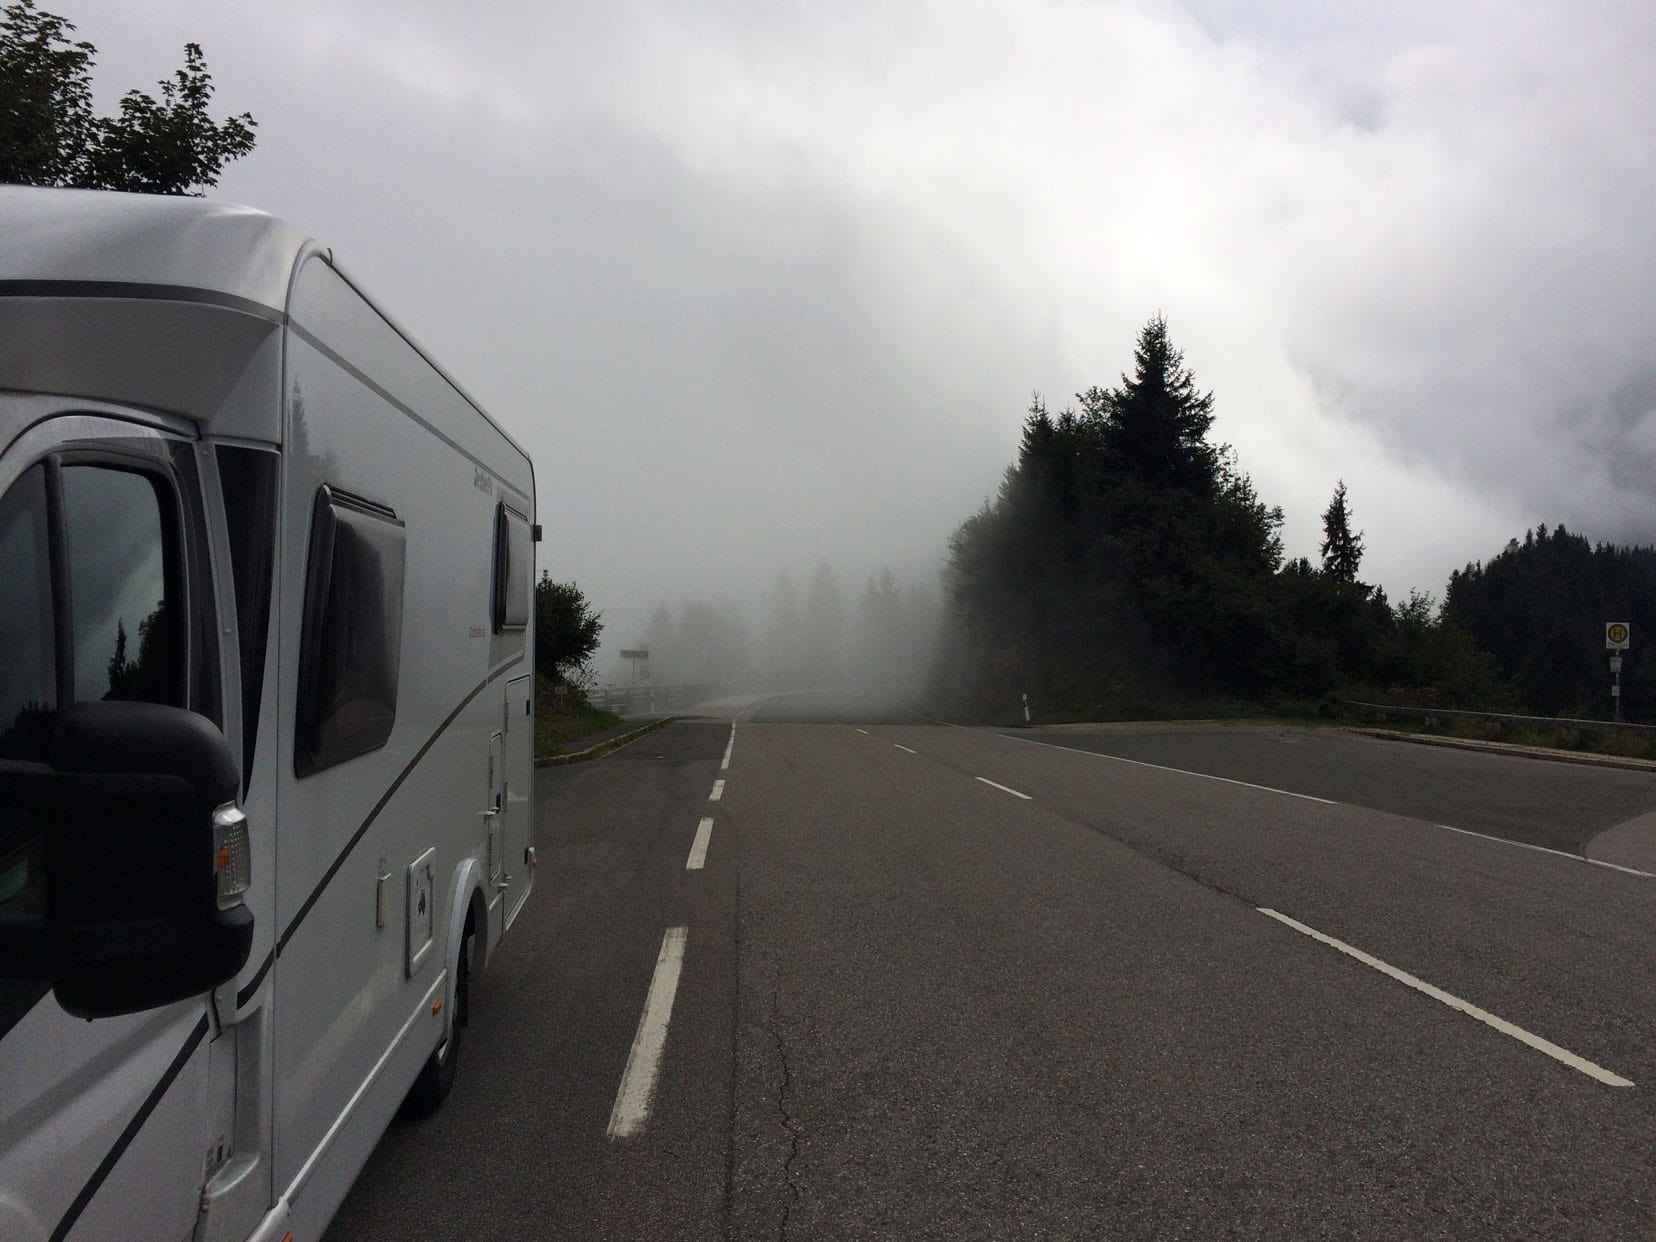 Our motorhome on a foggy road